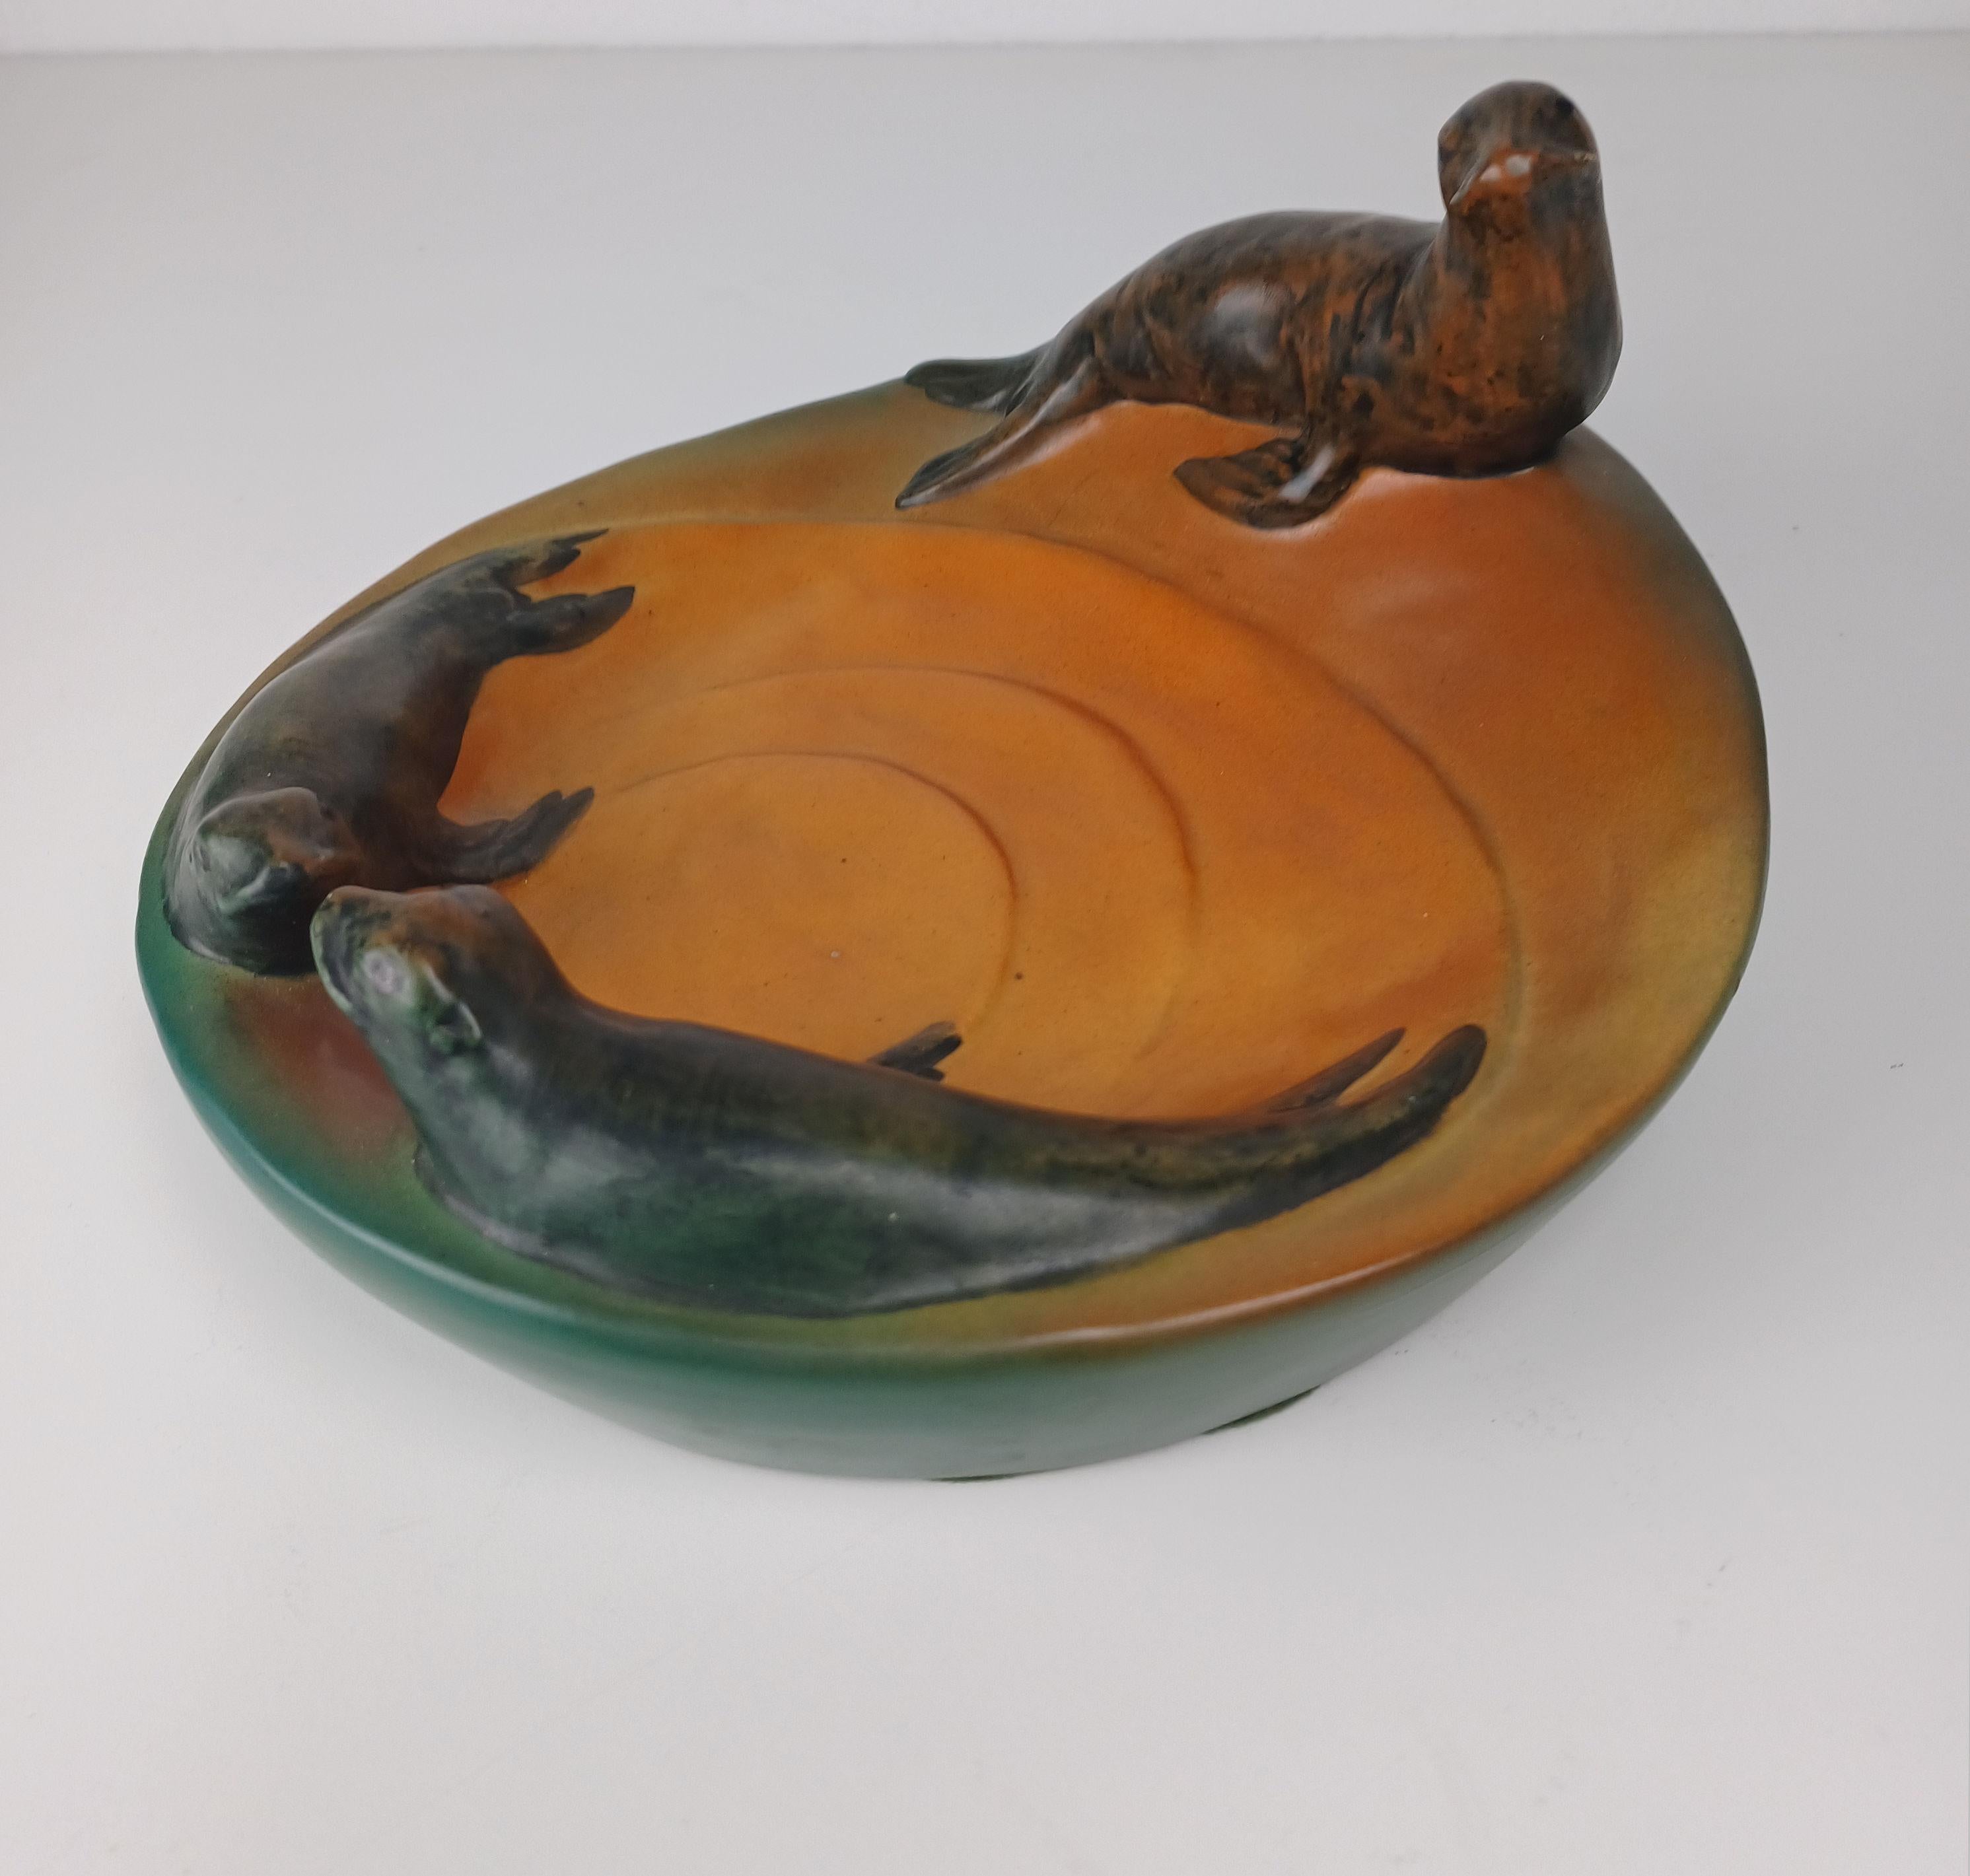 Hand-Crafted 1910's Danish Art Nouveau Handcrafted Sealion Bowl - Ash Tray by P. Ipsens Enke For Sale